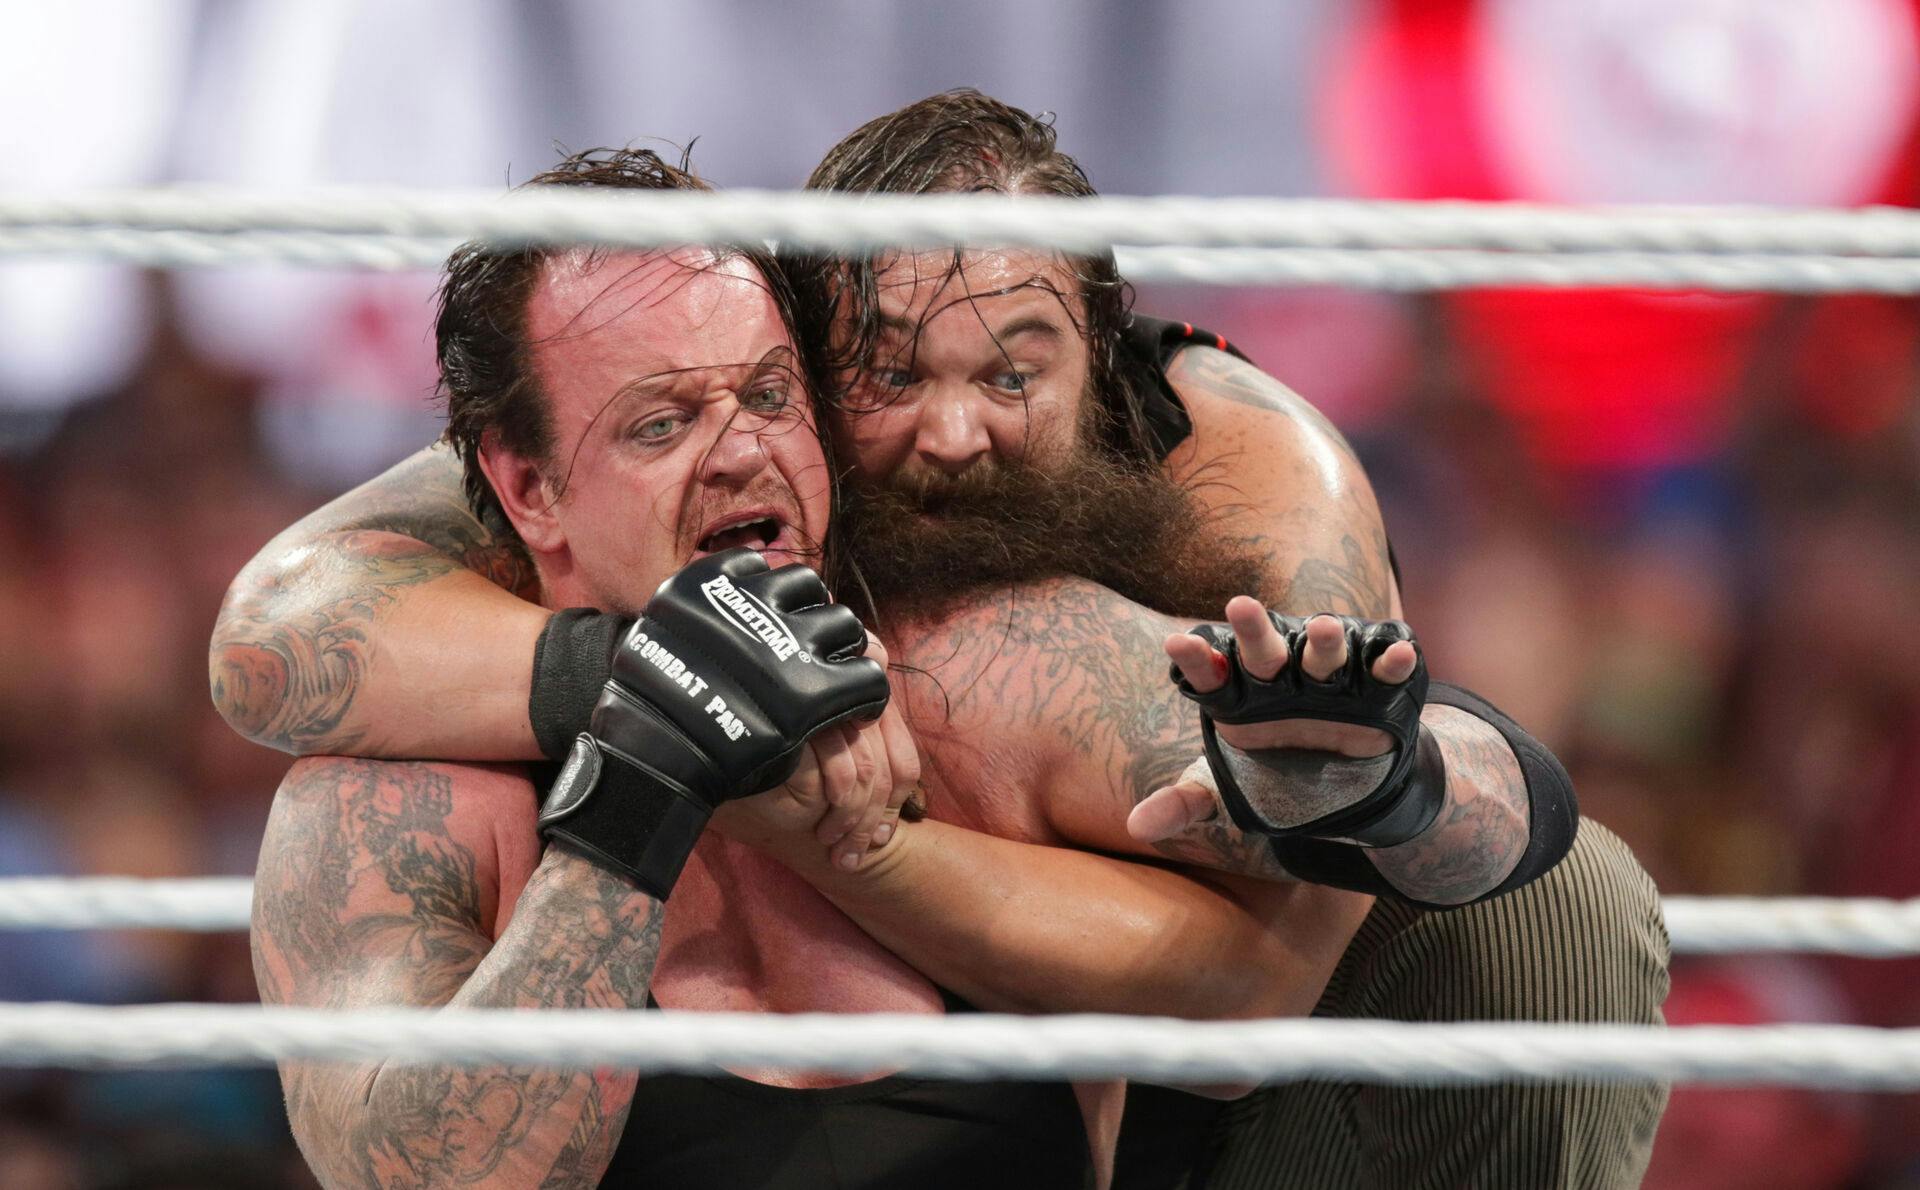 Bray Wyatt keeps his opponent The Undertaker in a hold at Wrestlemania XXXI